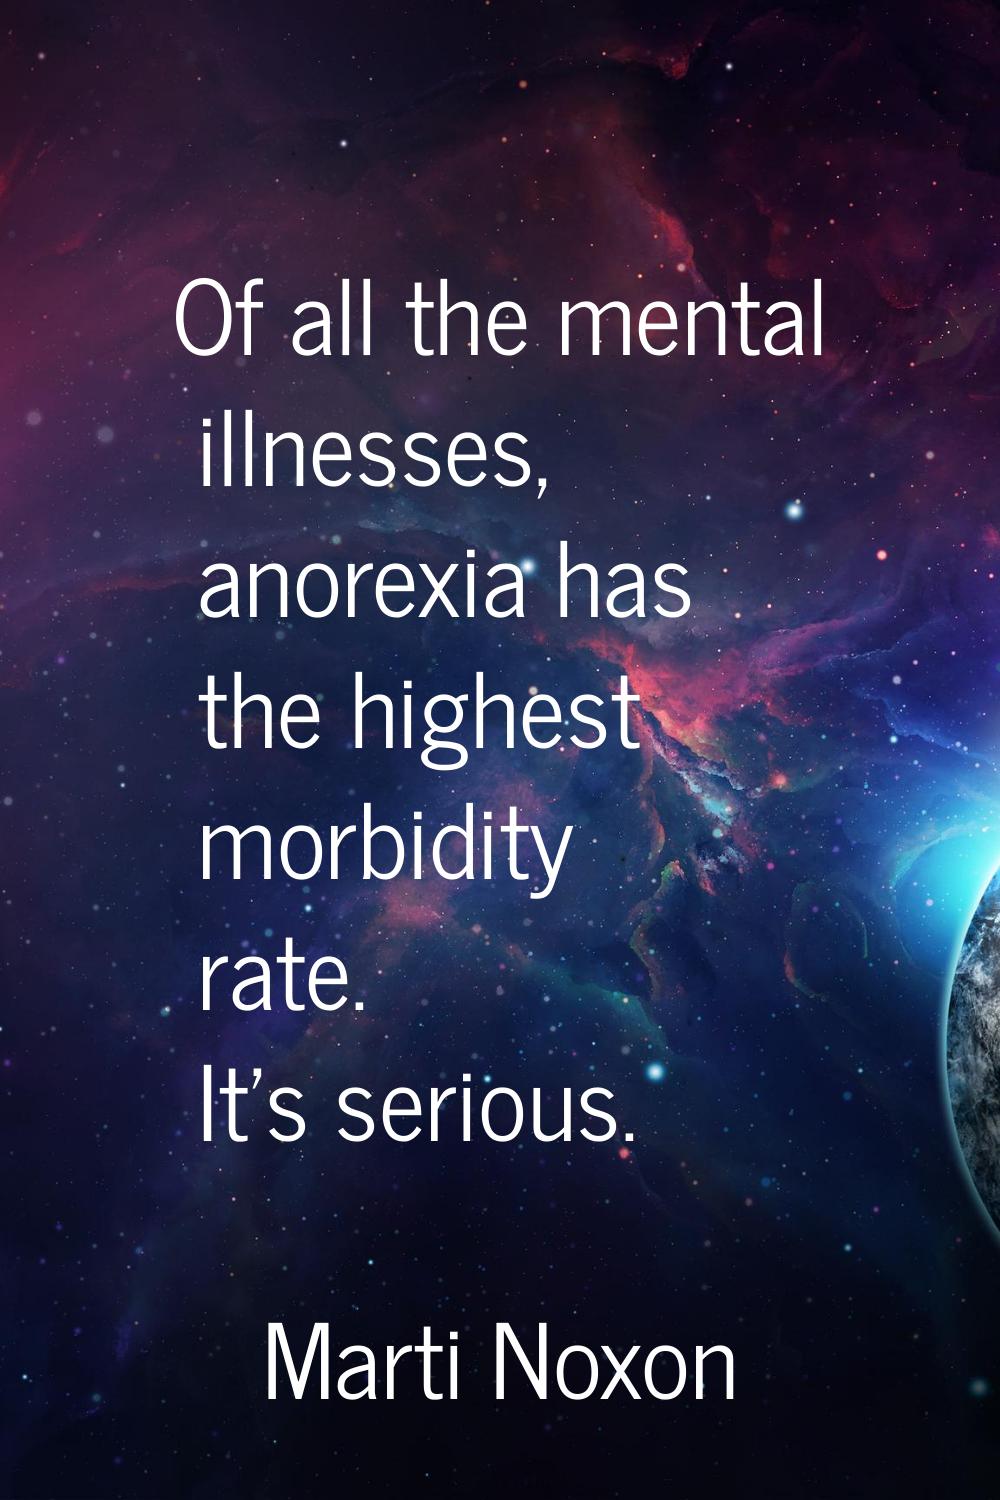 Of all the mental illnesses, anorexia has the highest morbidity rate. It's serious.